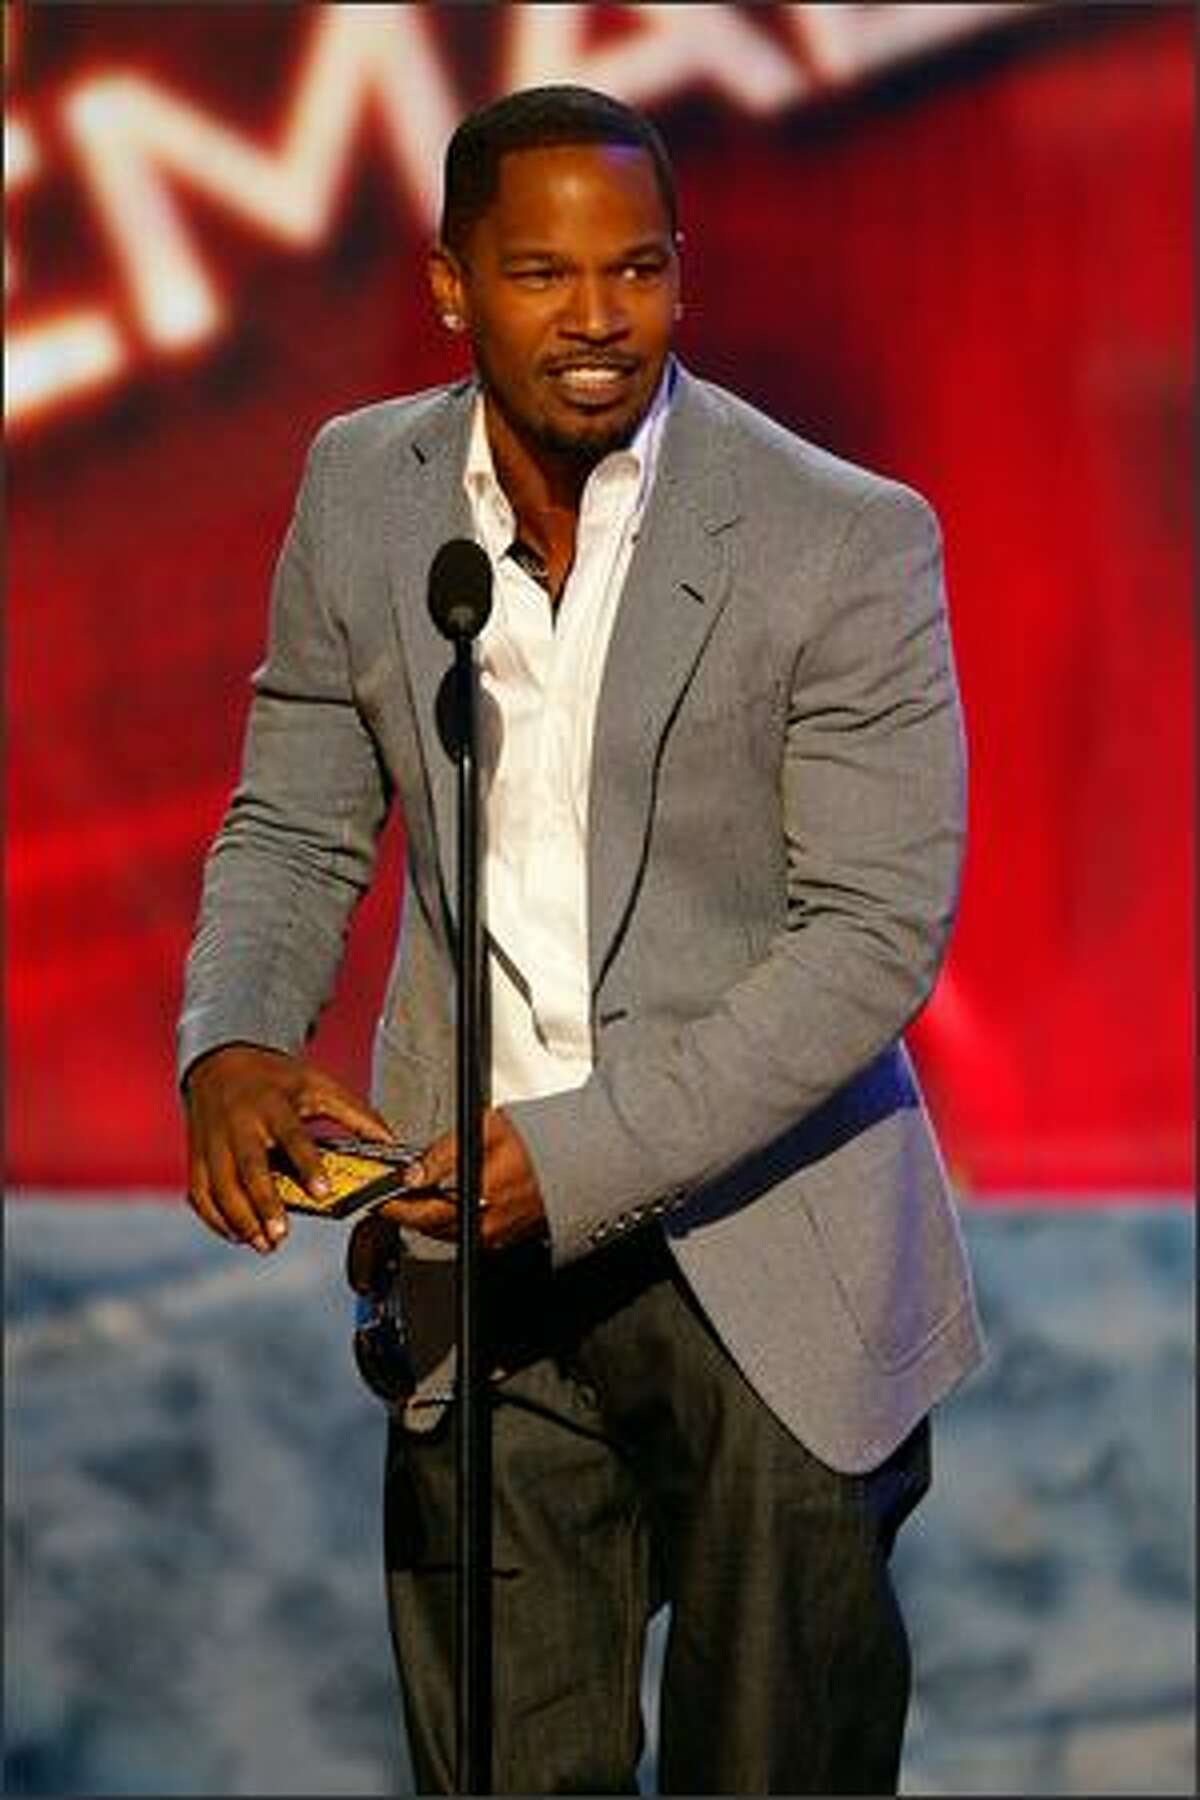 Actor Jamie Foxx presents the Soul/R&B Female Artist award onstage during the 2008 American Music Awards held at the Nokia Theatre in Los Angeles on Sunday, Nov. 23.